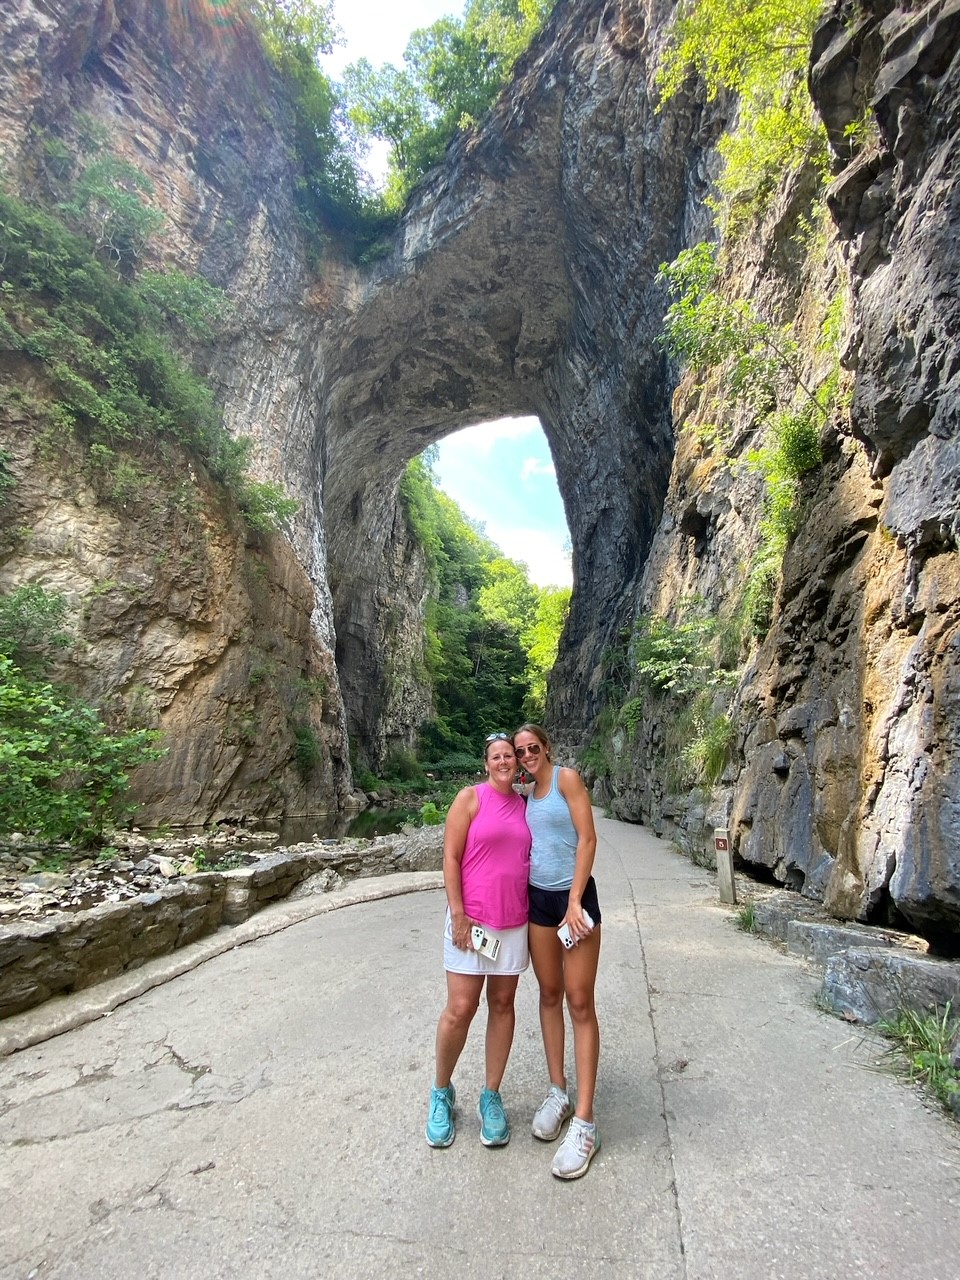 Mrs. Capozzi poses in front of Natural Bridge with one of her daughters. She wears teal sneakers, a white skirt, and a bright pink sleeveless top.